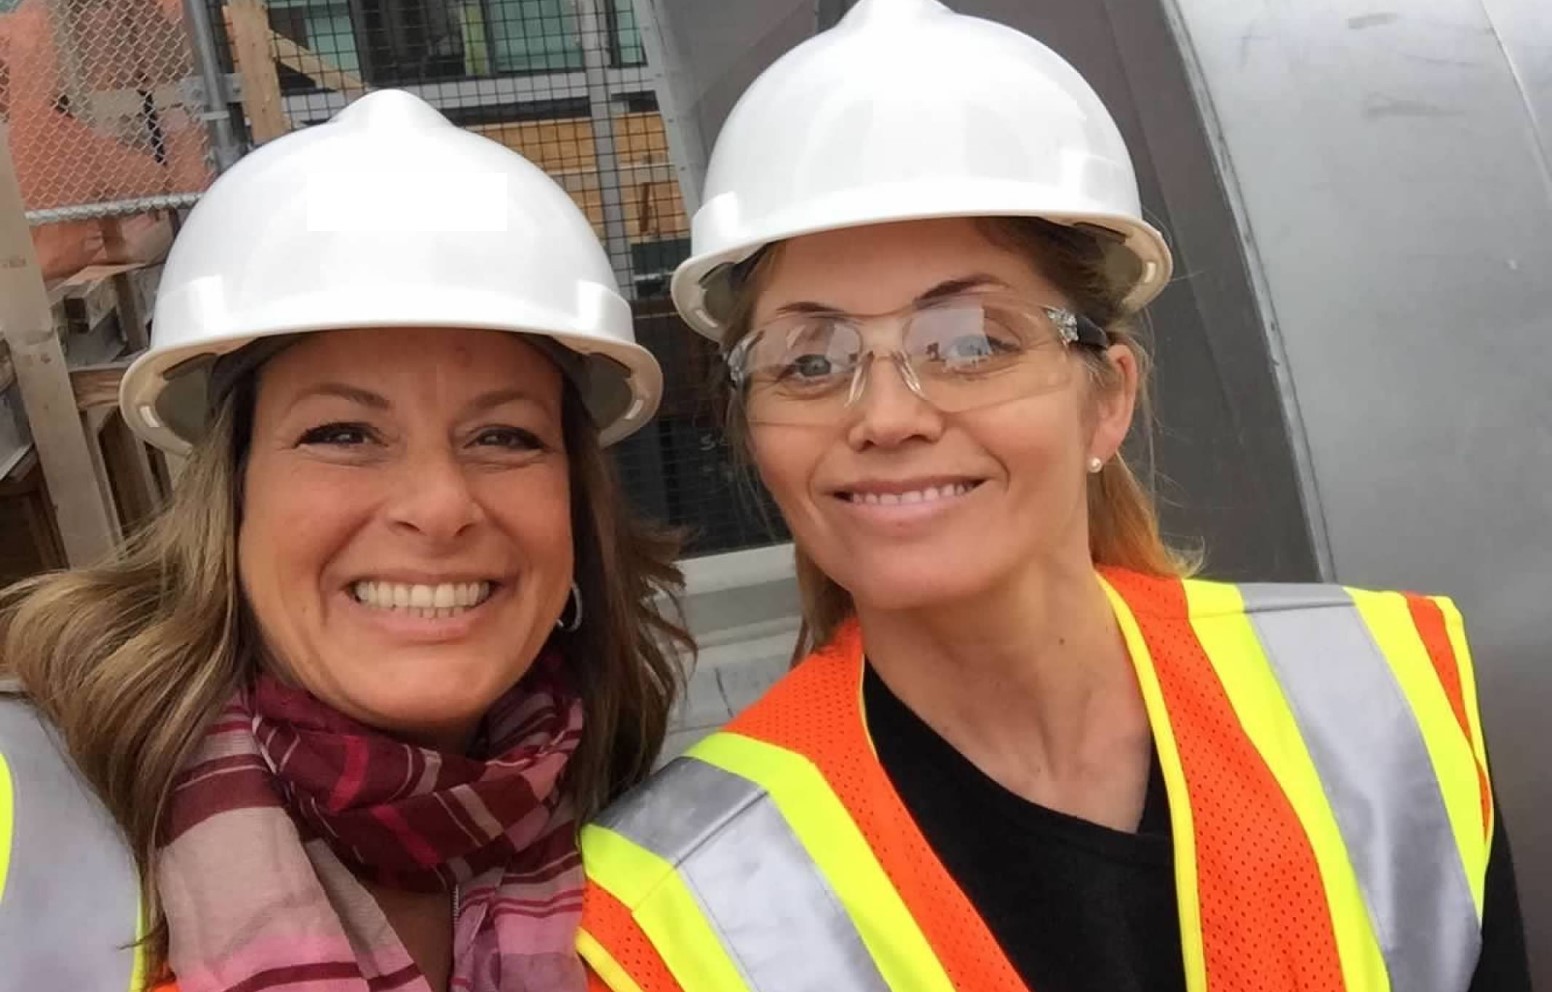 Two Fairfield associates wearing hard hats on a construction tour